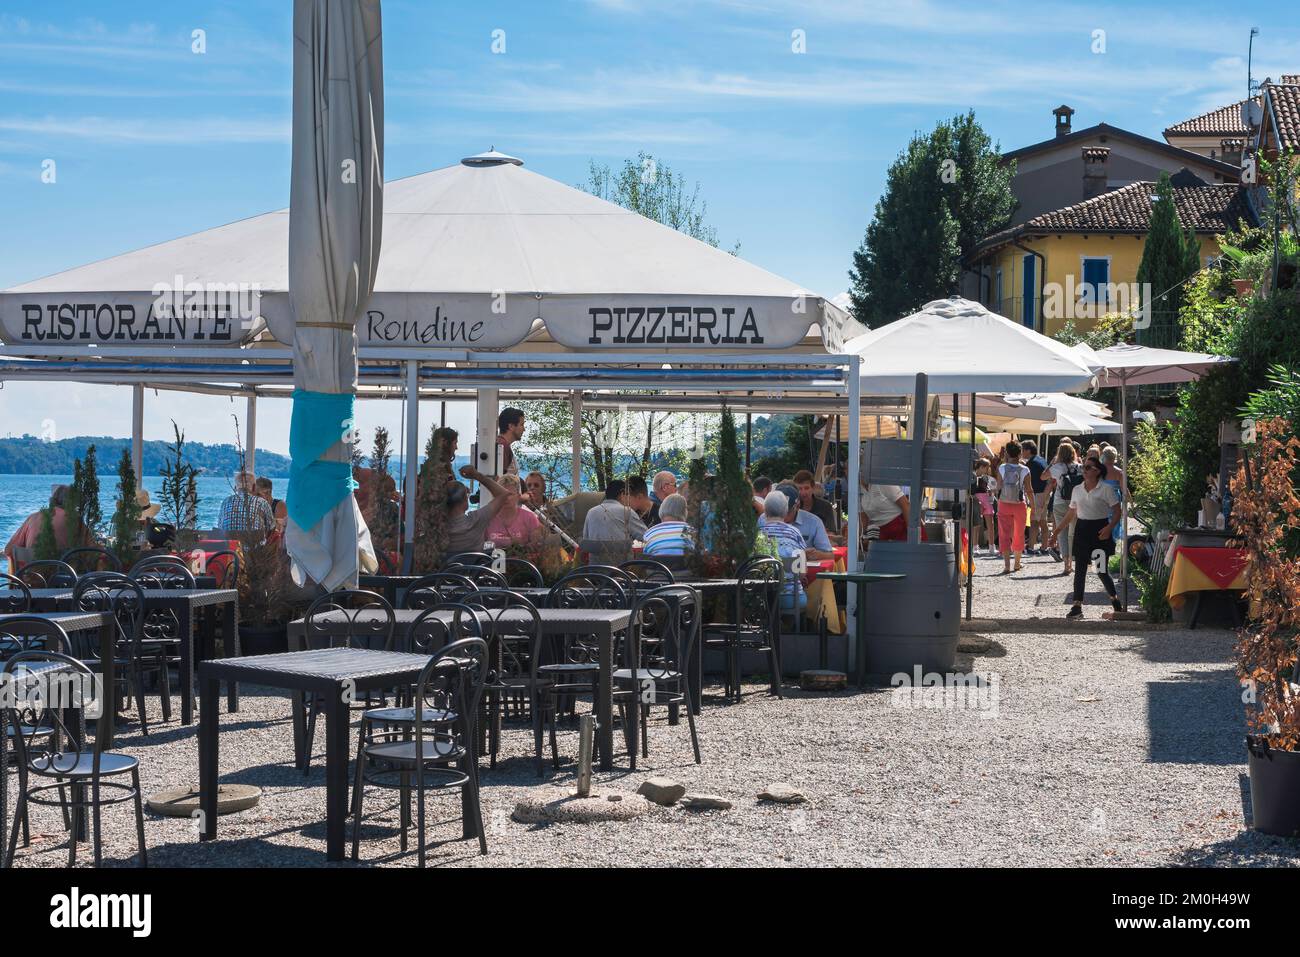 View in summer of people dining at lakeside cafe terraces in the fishing village of Isola dei Pescatori, Borromeo Islands, Lake Maggiore, Italy Stock Photo